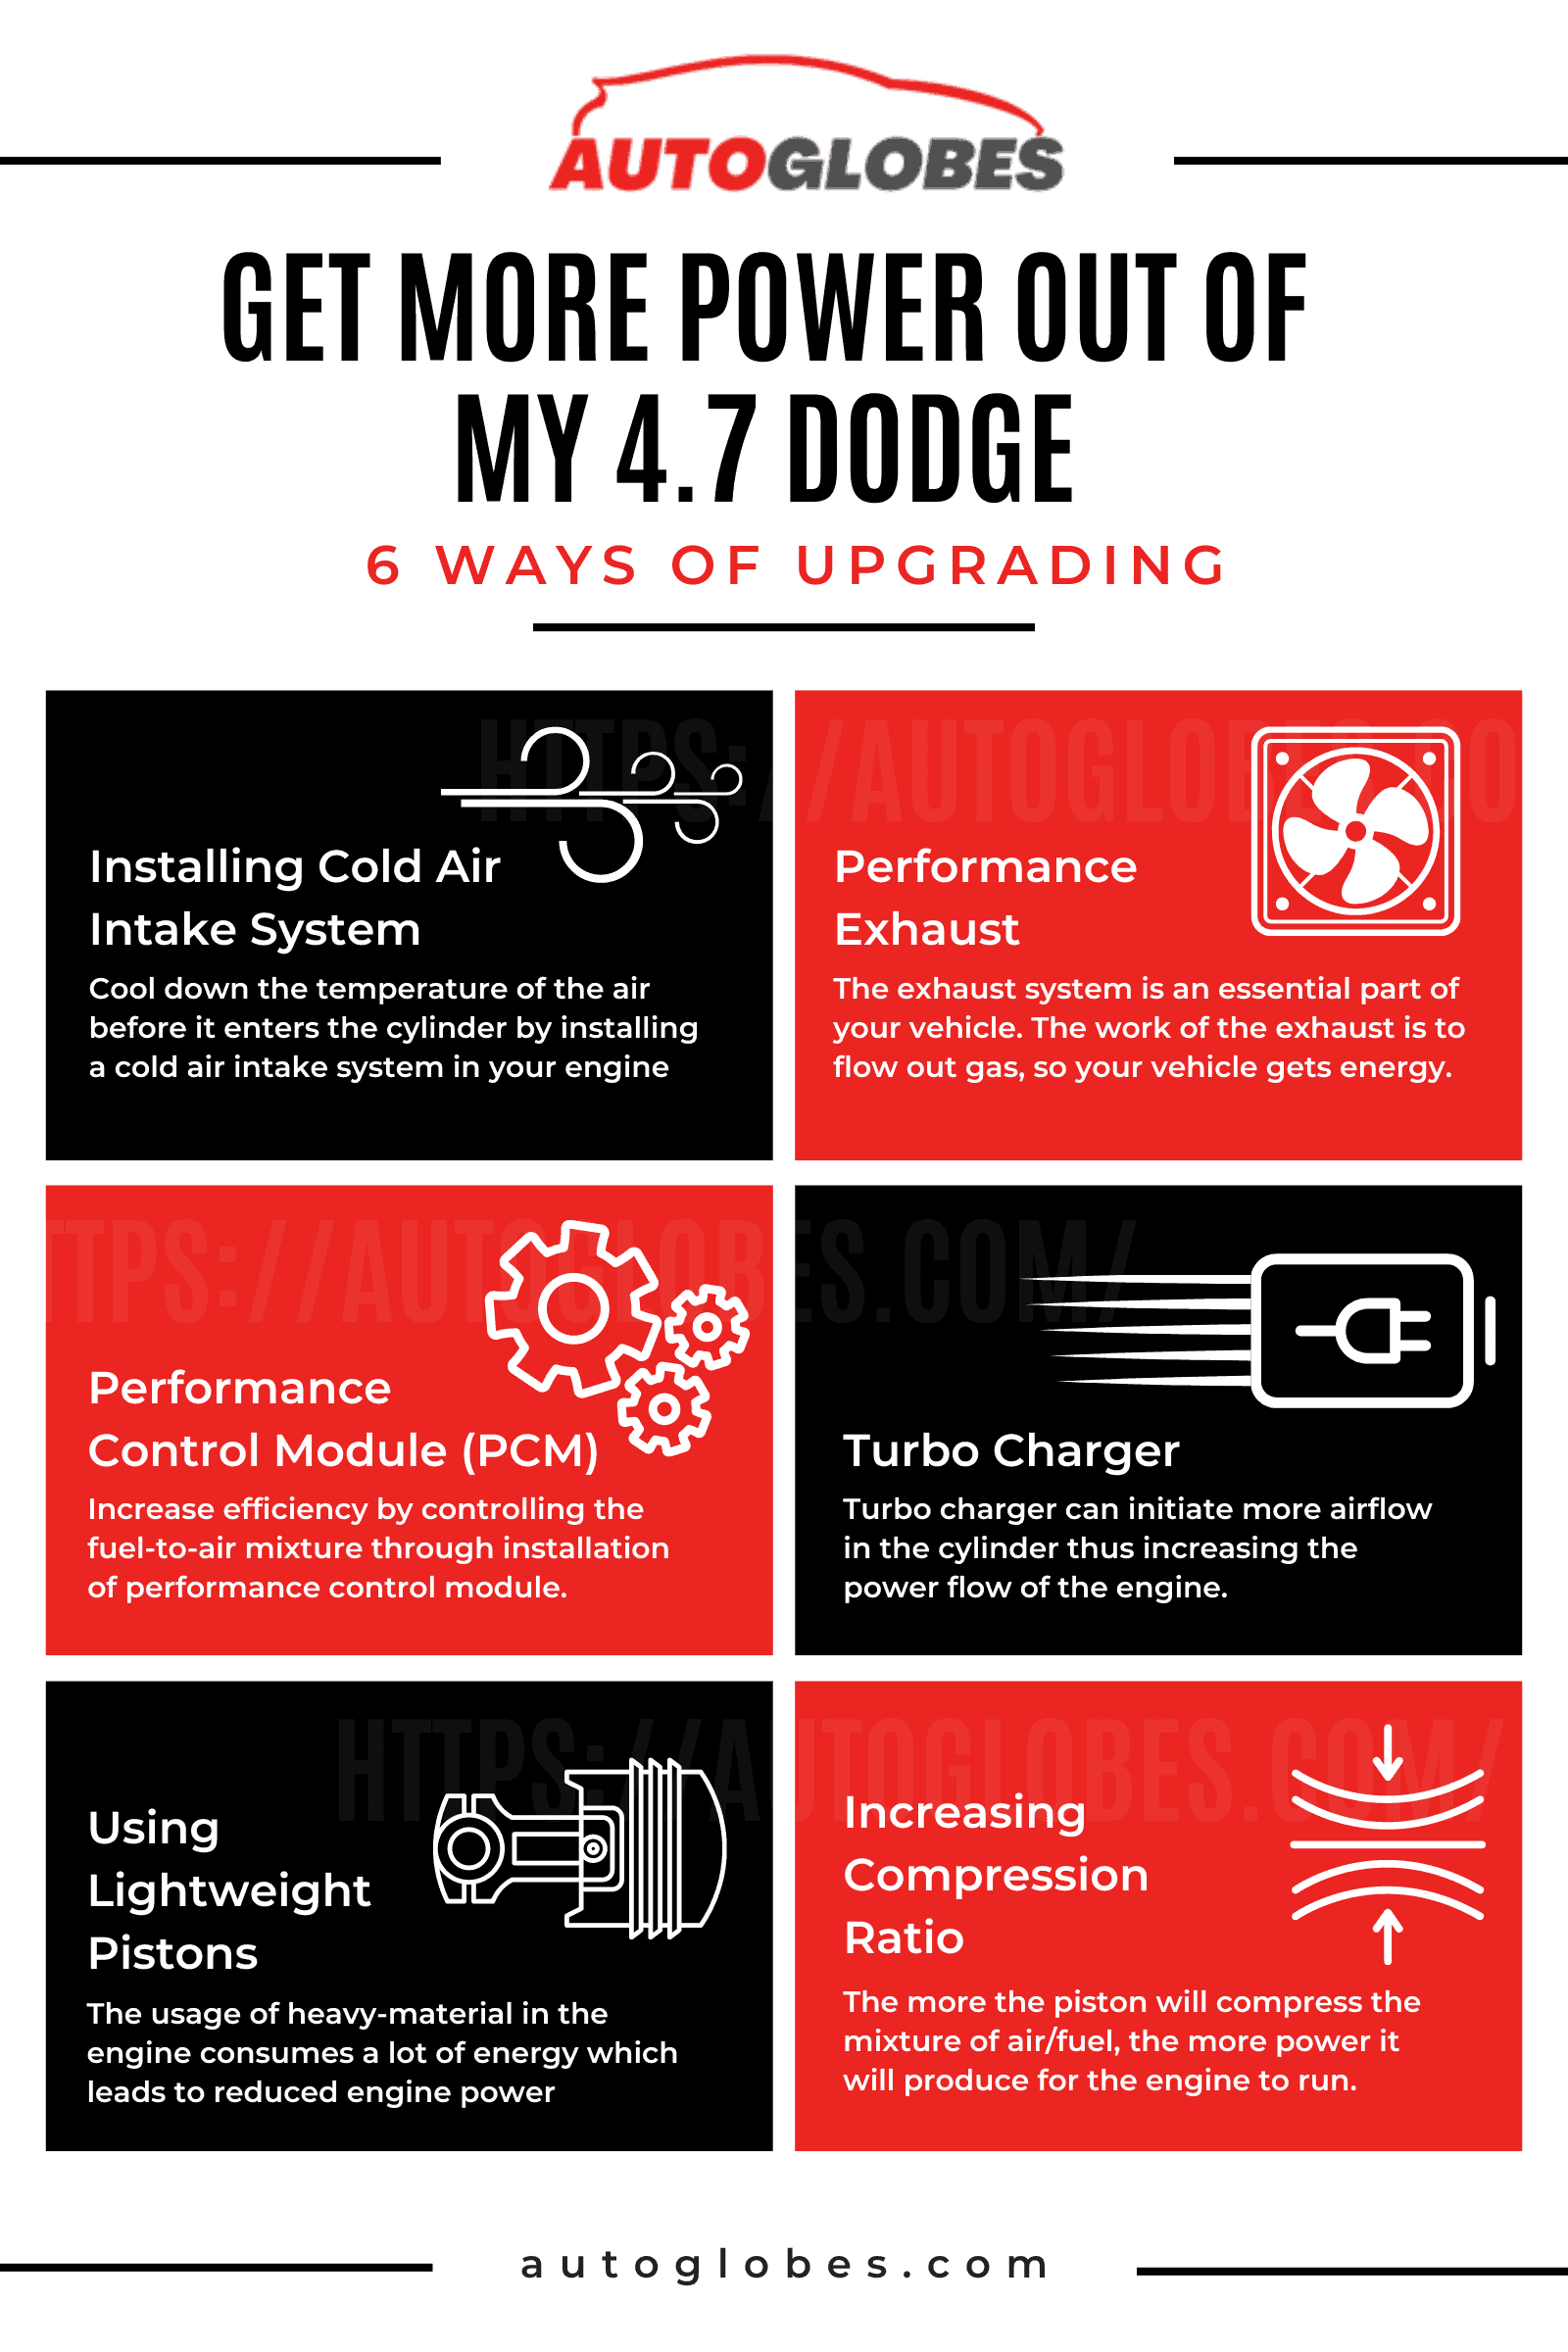 Boost Your 4.7 Dodge's Performance Infographic